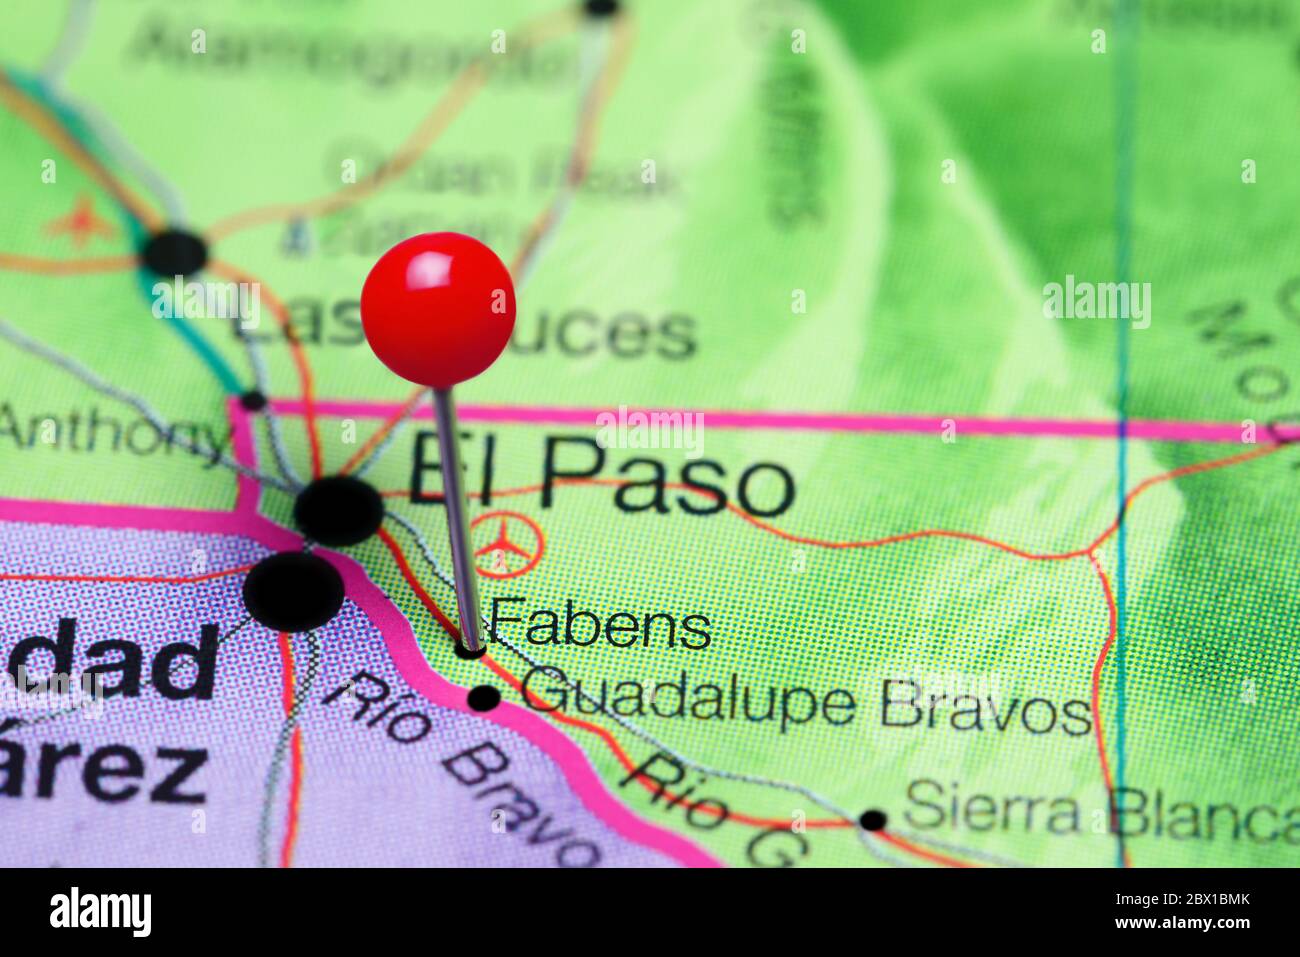 Fabens pinned on a map of Texas, USA Stock Photo